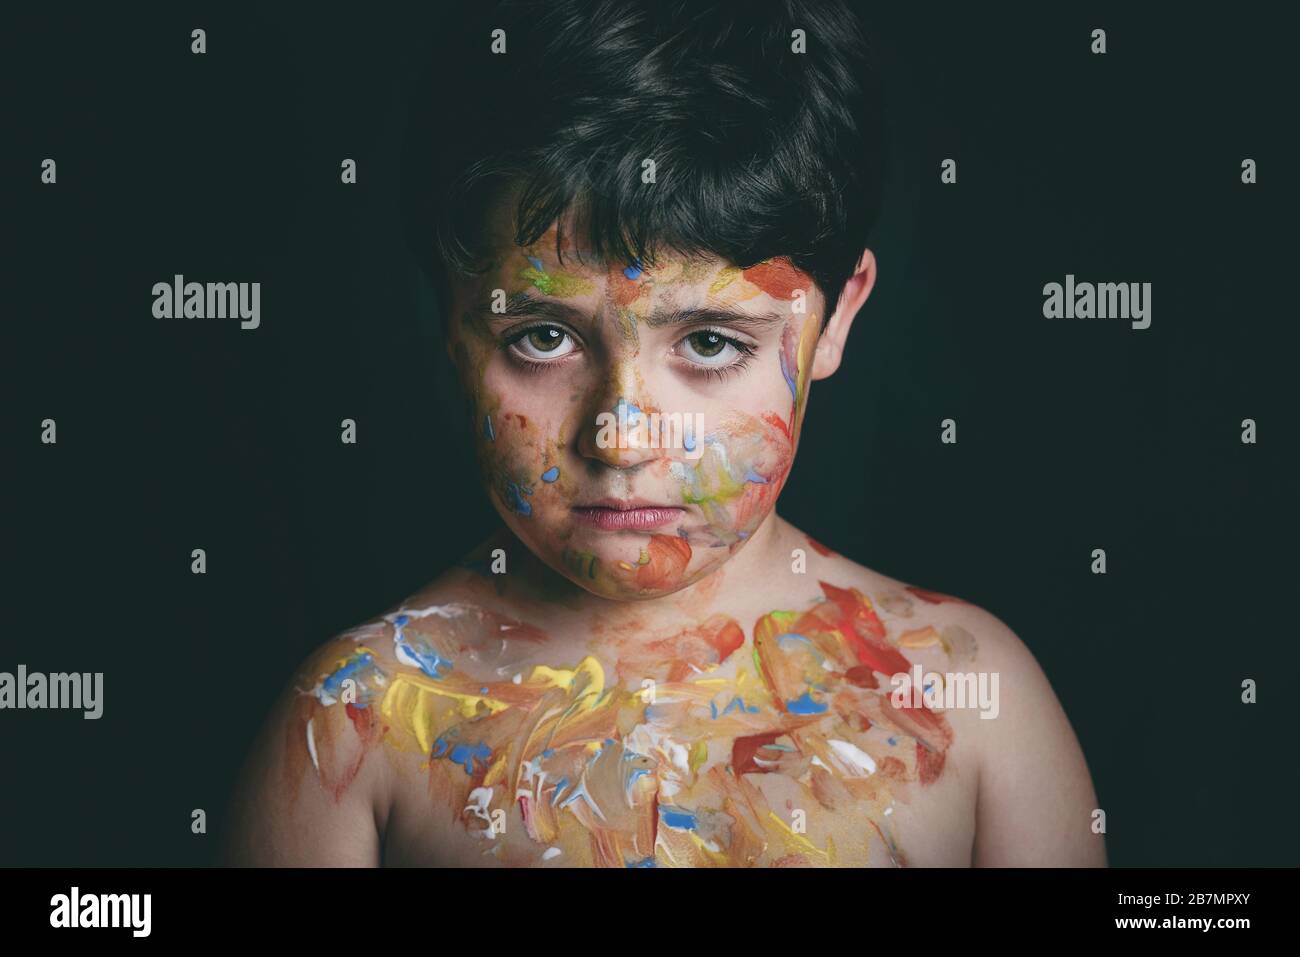 child with face painting on black background Stock Photo